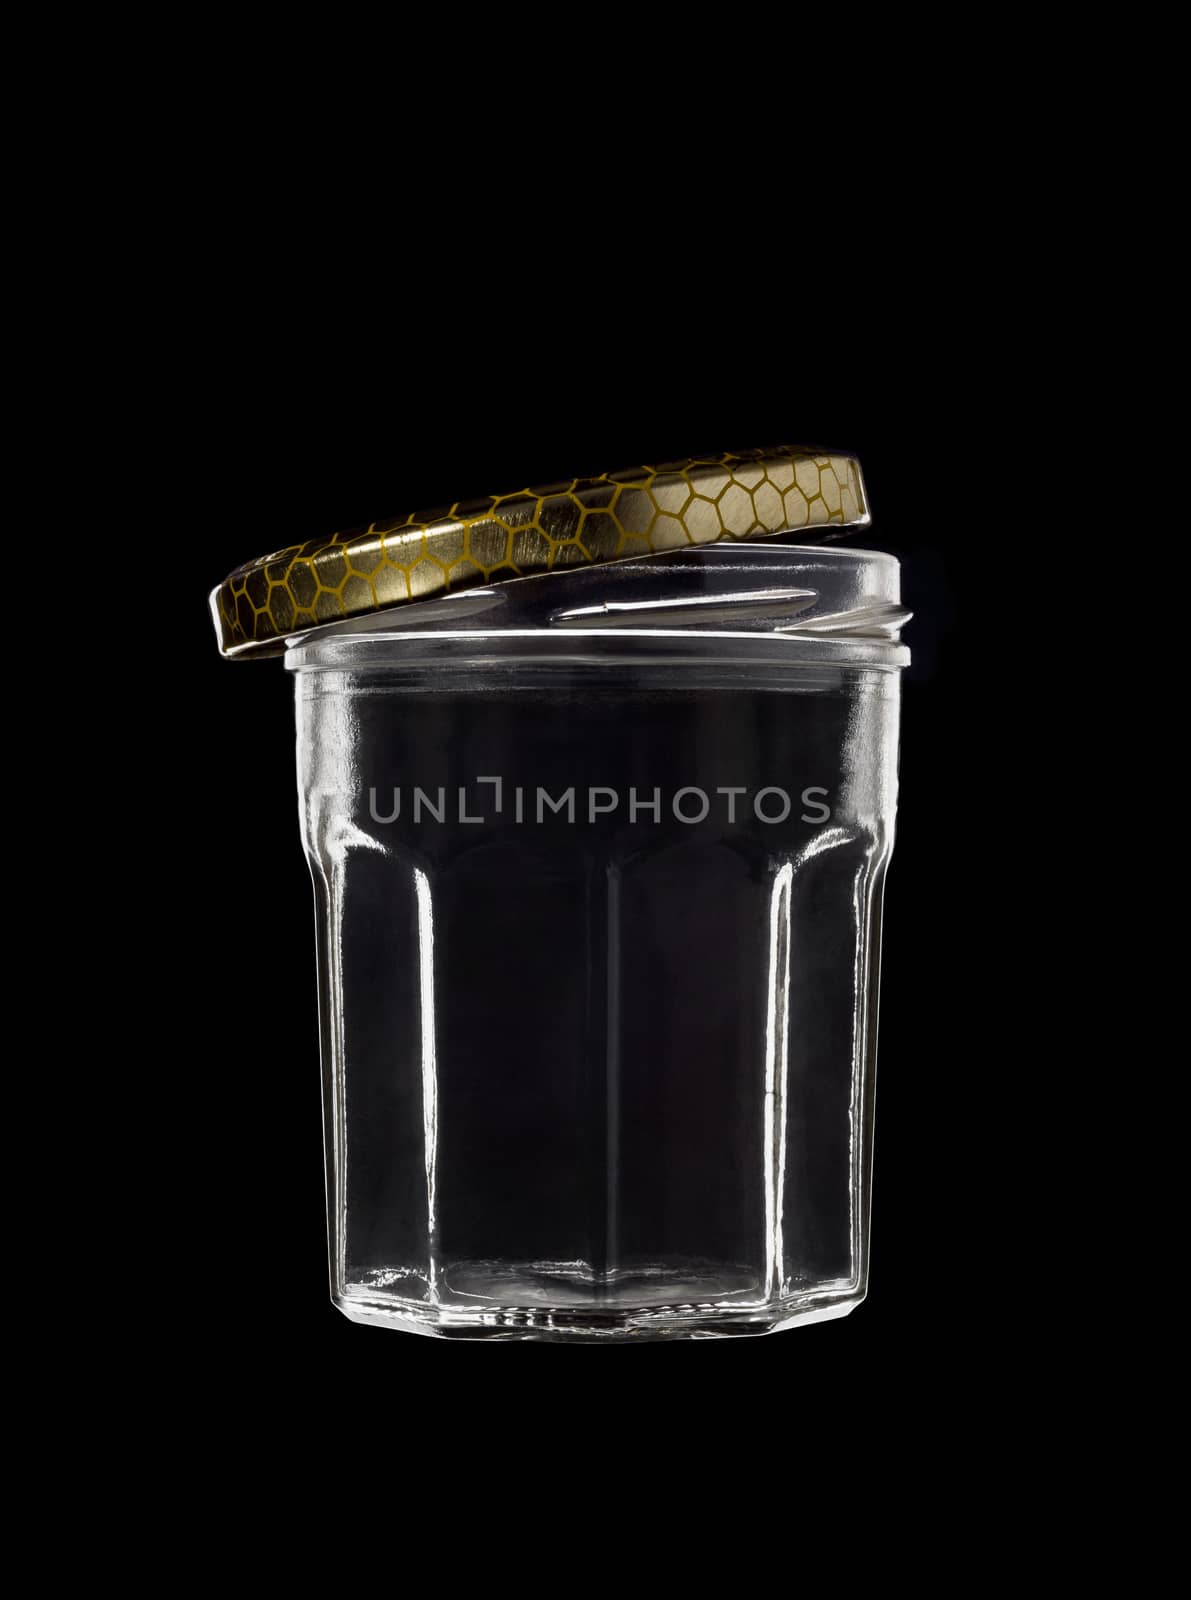 Transparent glass jar on black background, with the open gold color top